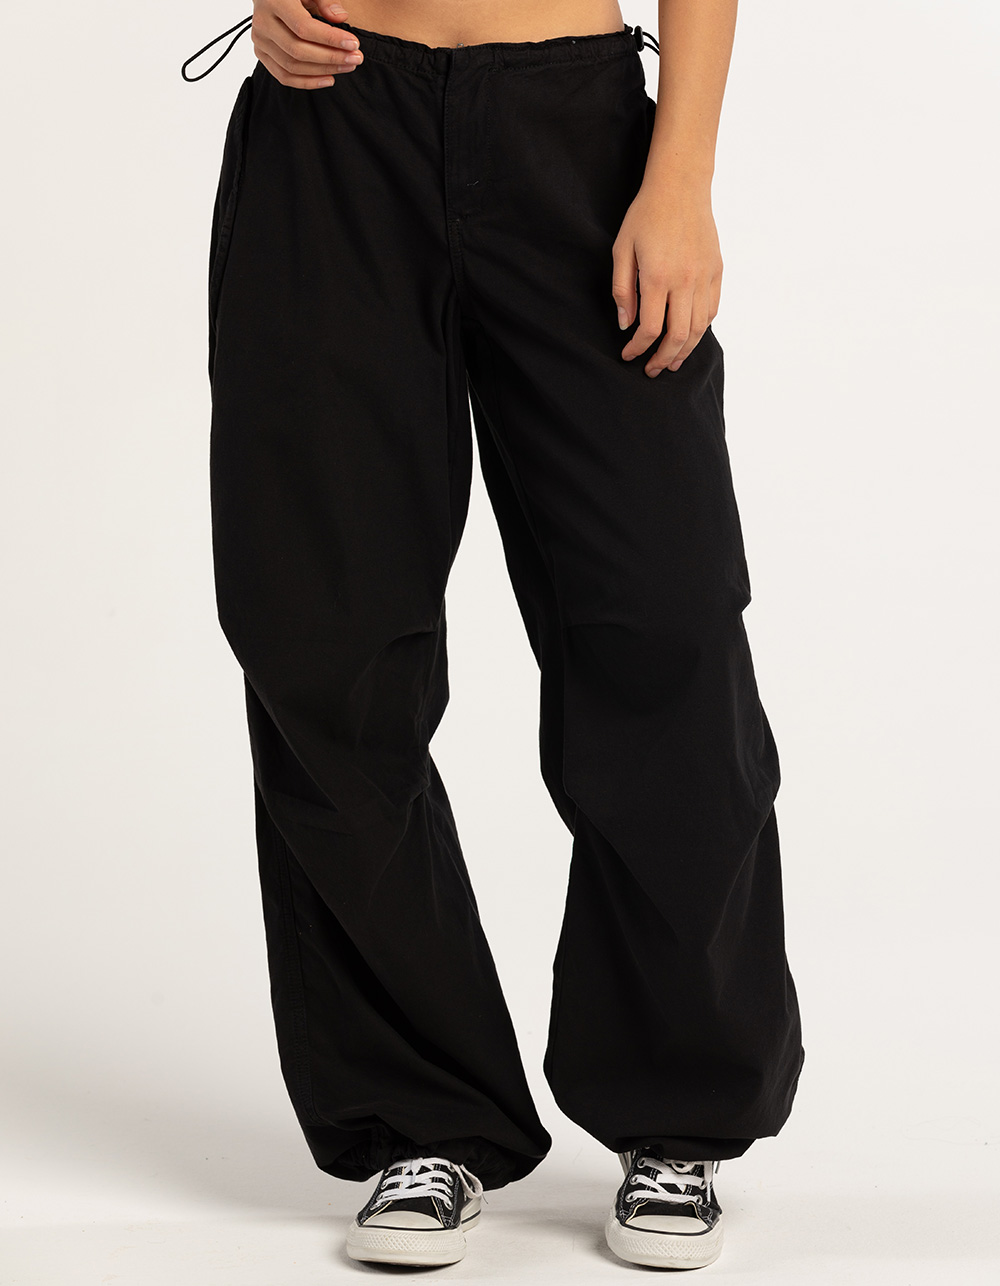 BDG Urban Outfitters Baggy Cargo Womens Pants - BLACK